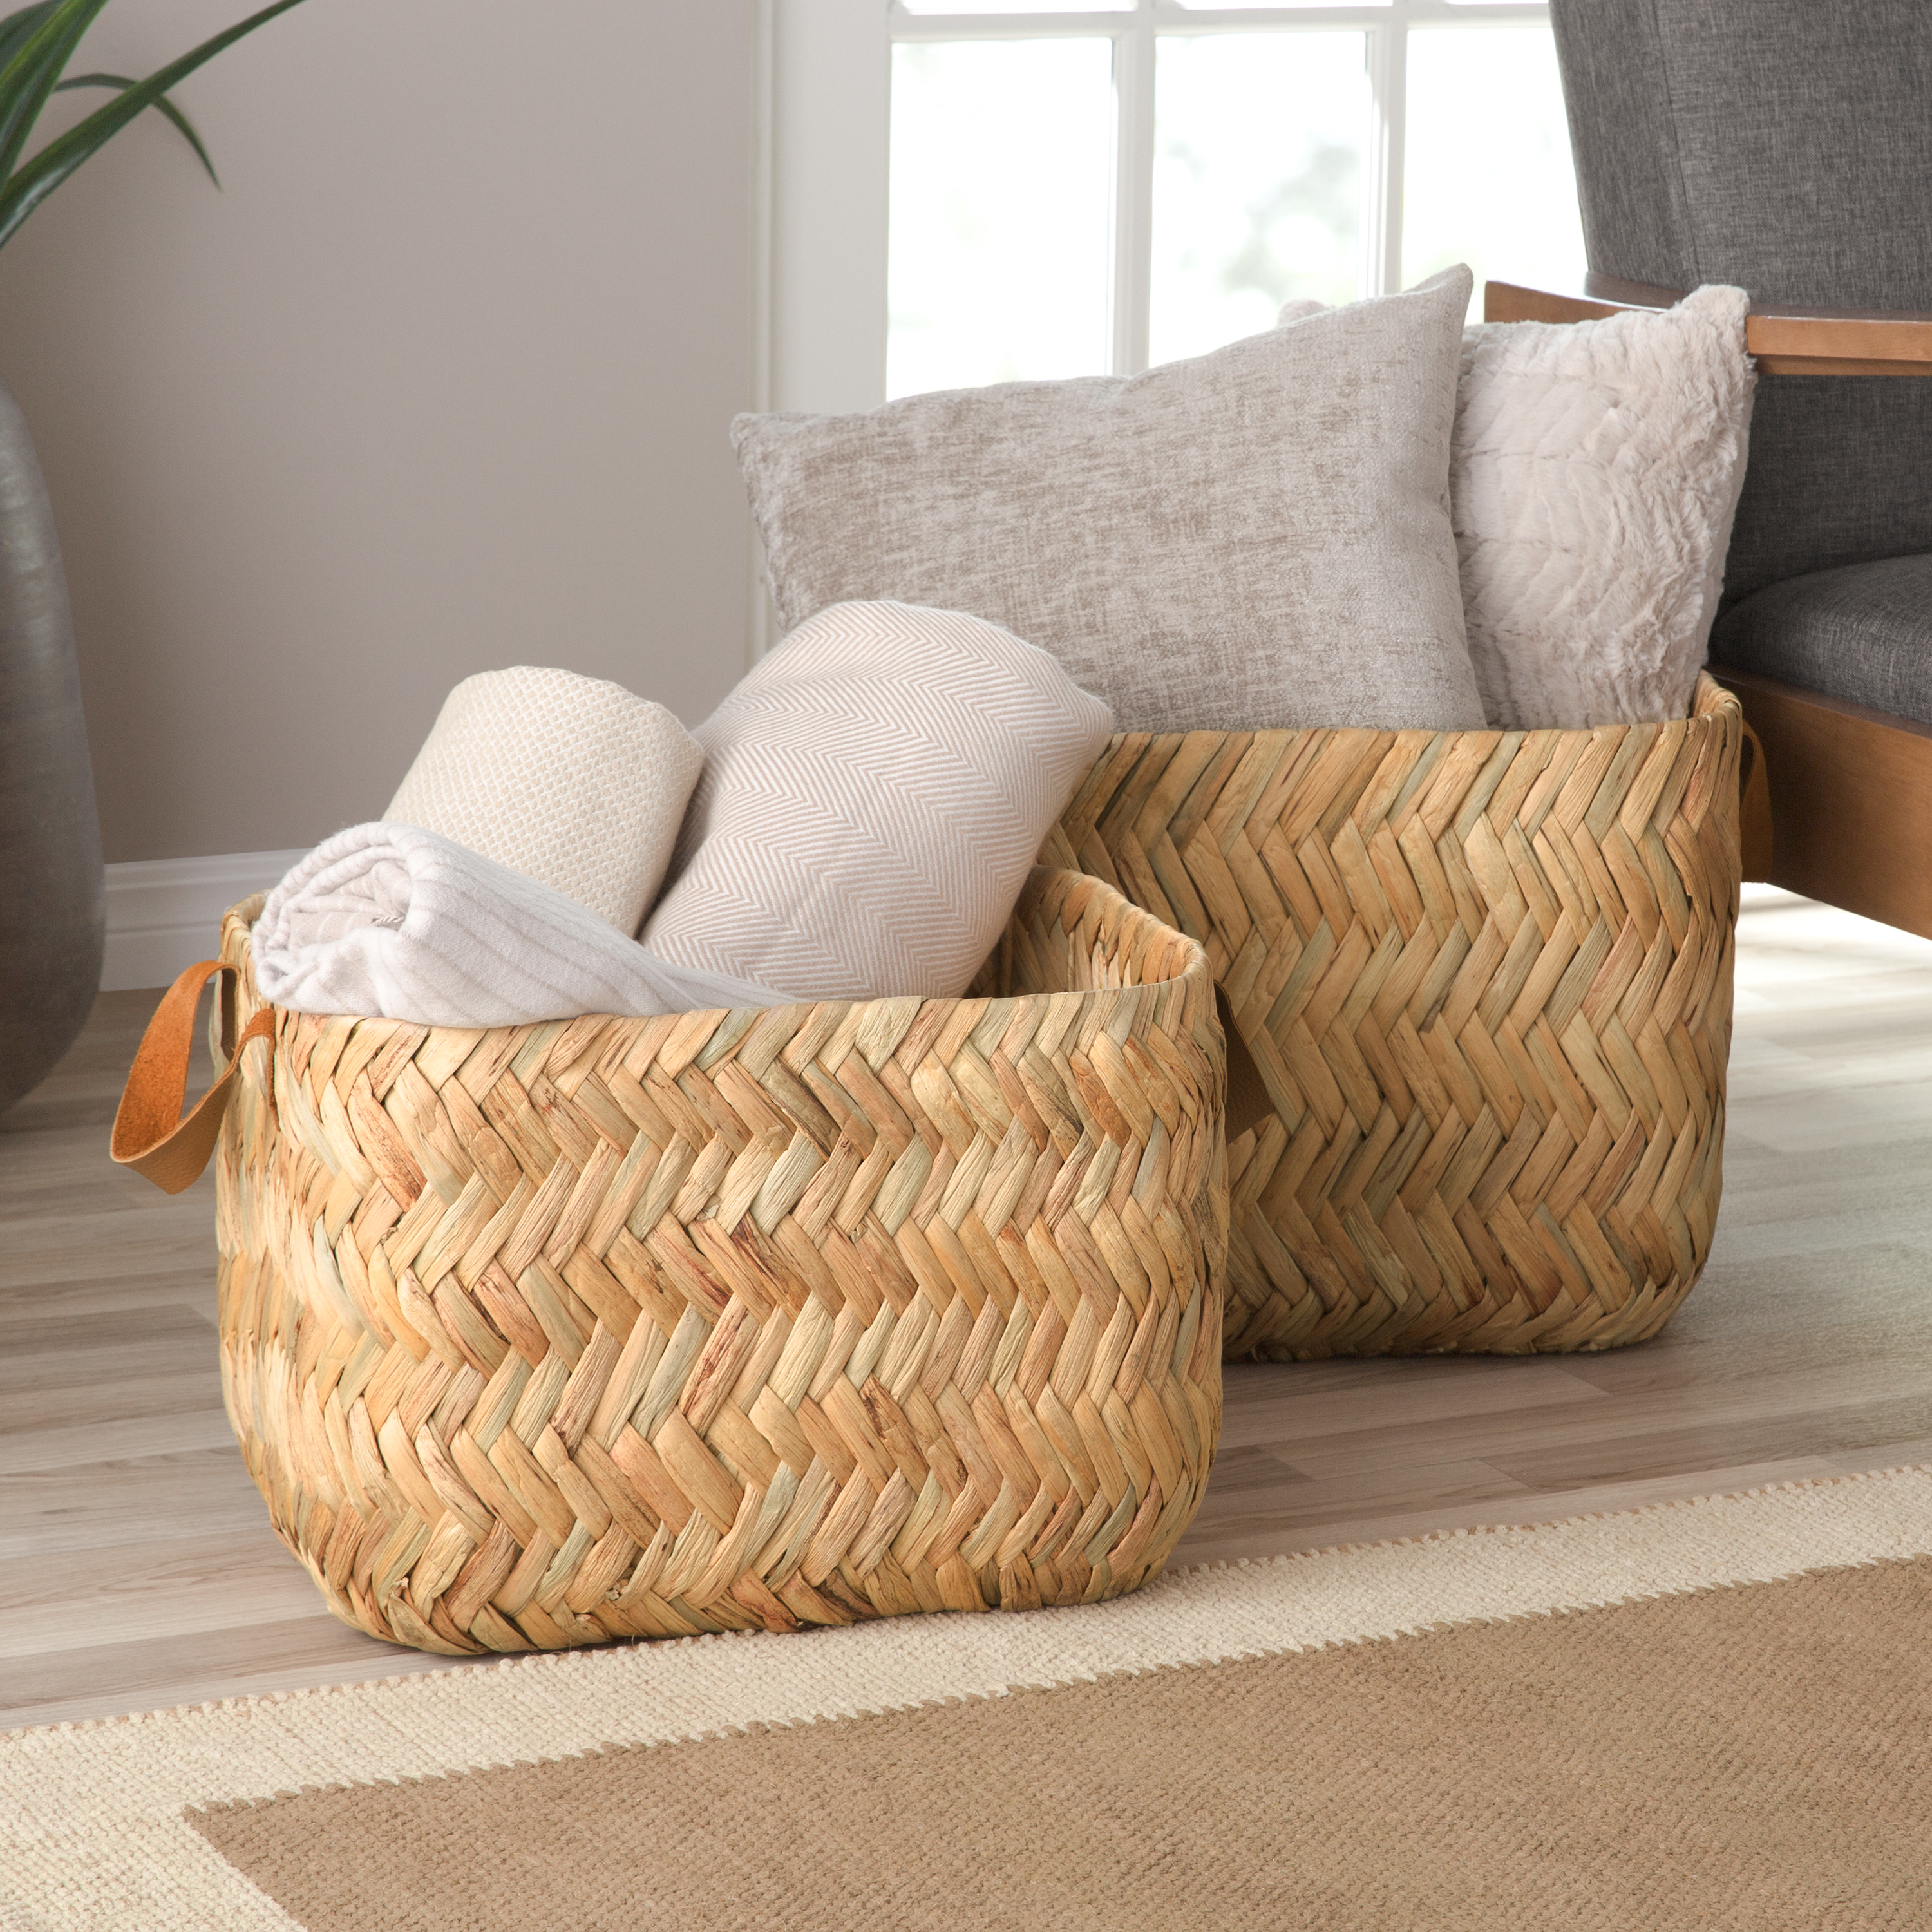 Two woven storage baskets